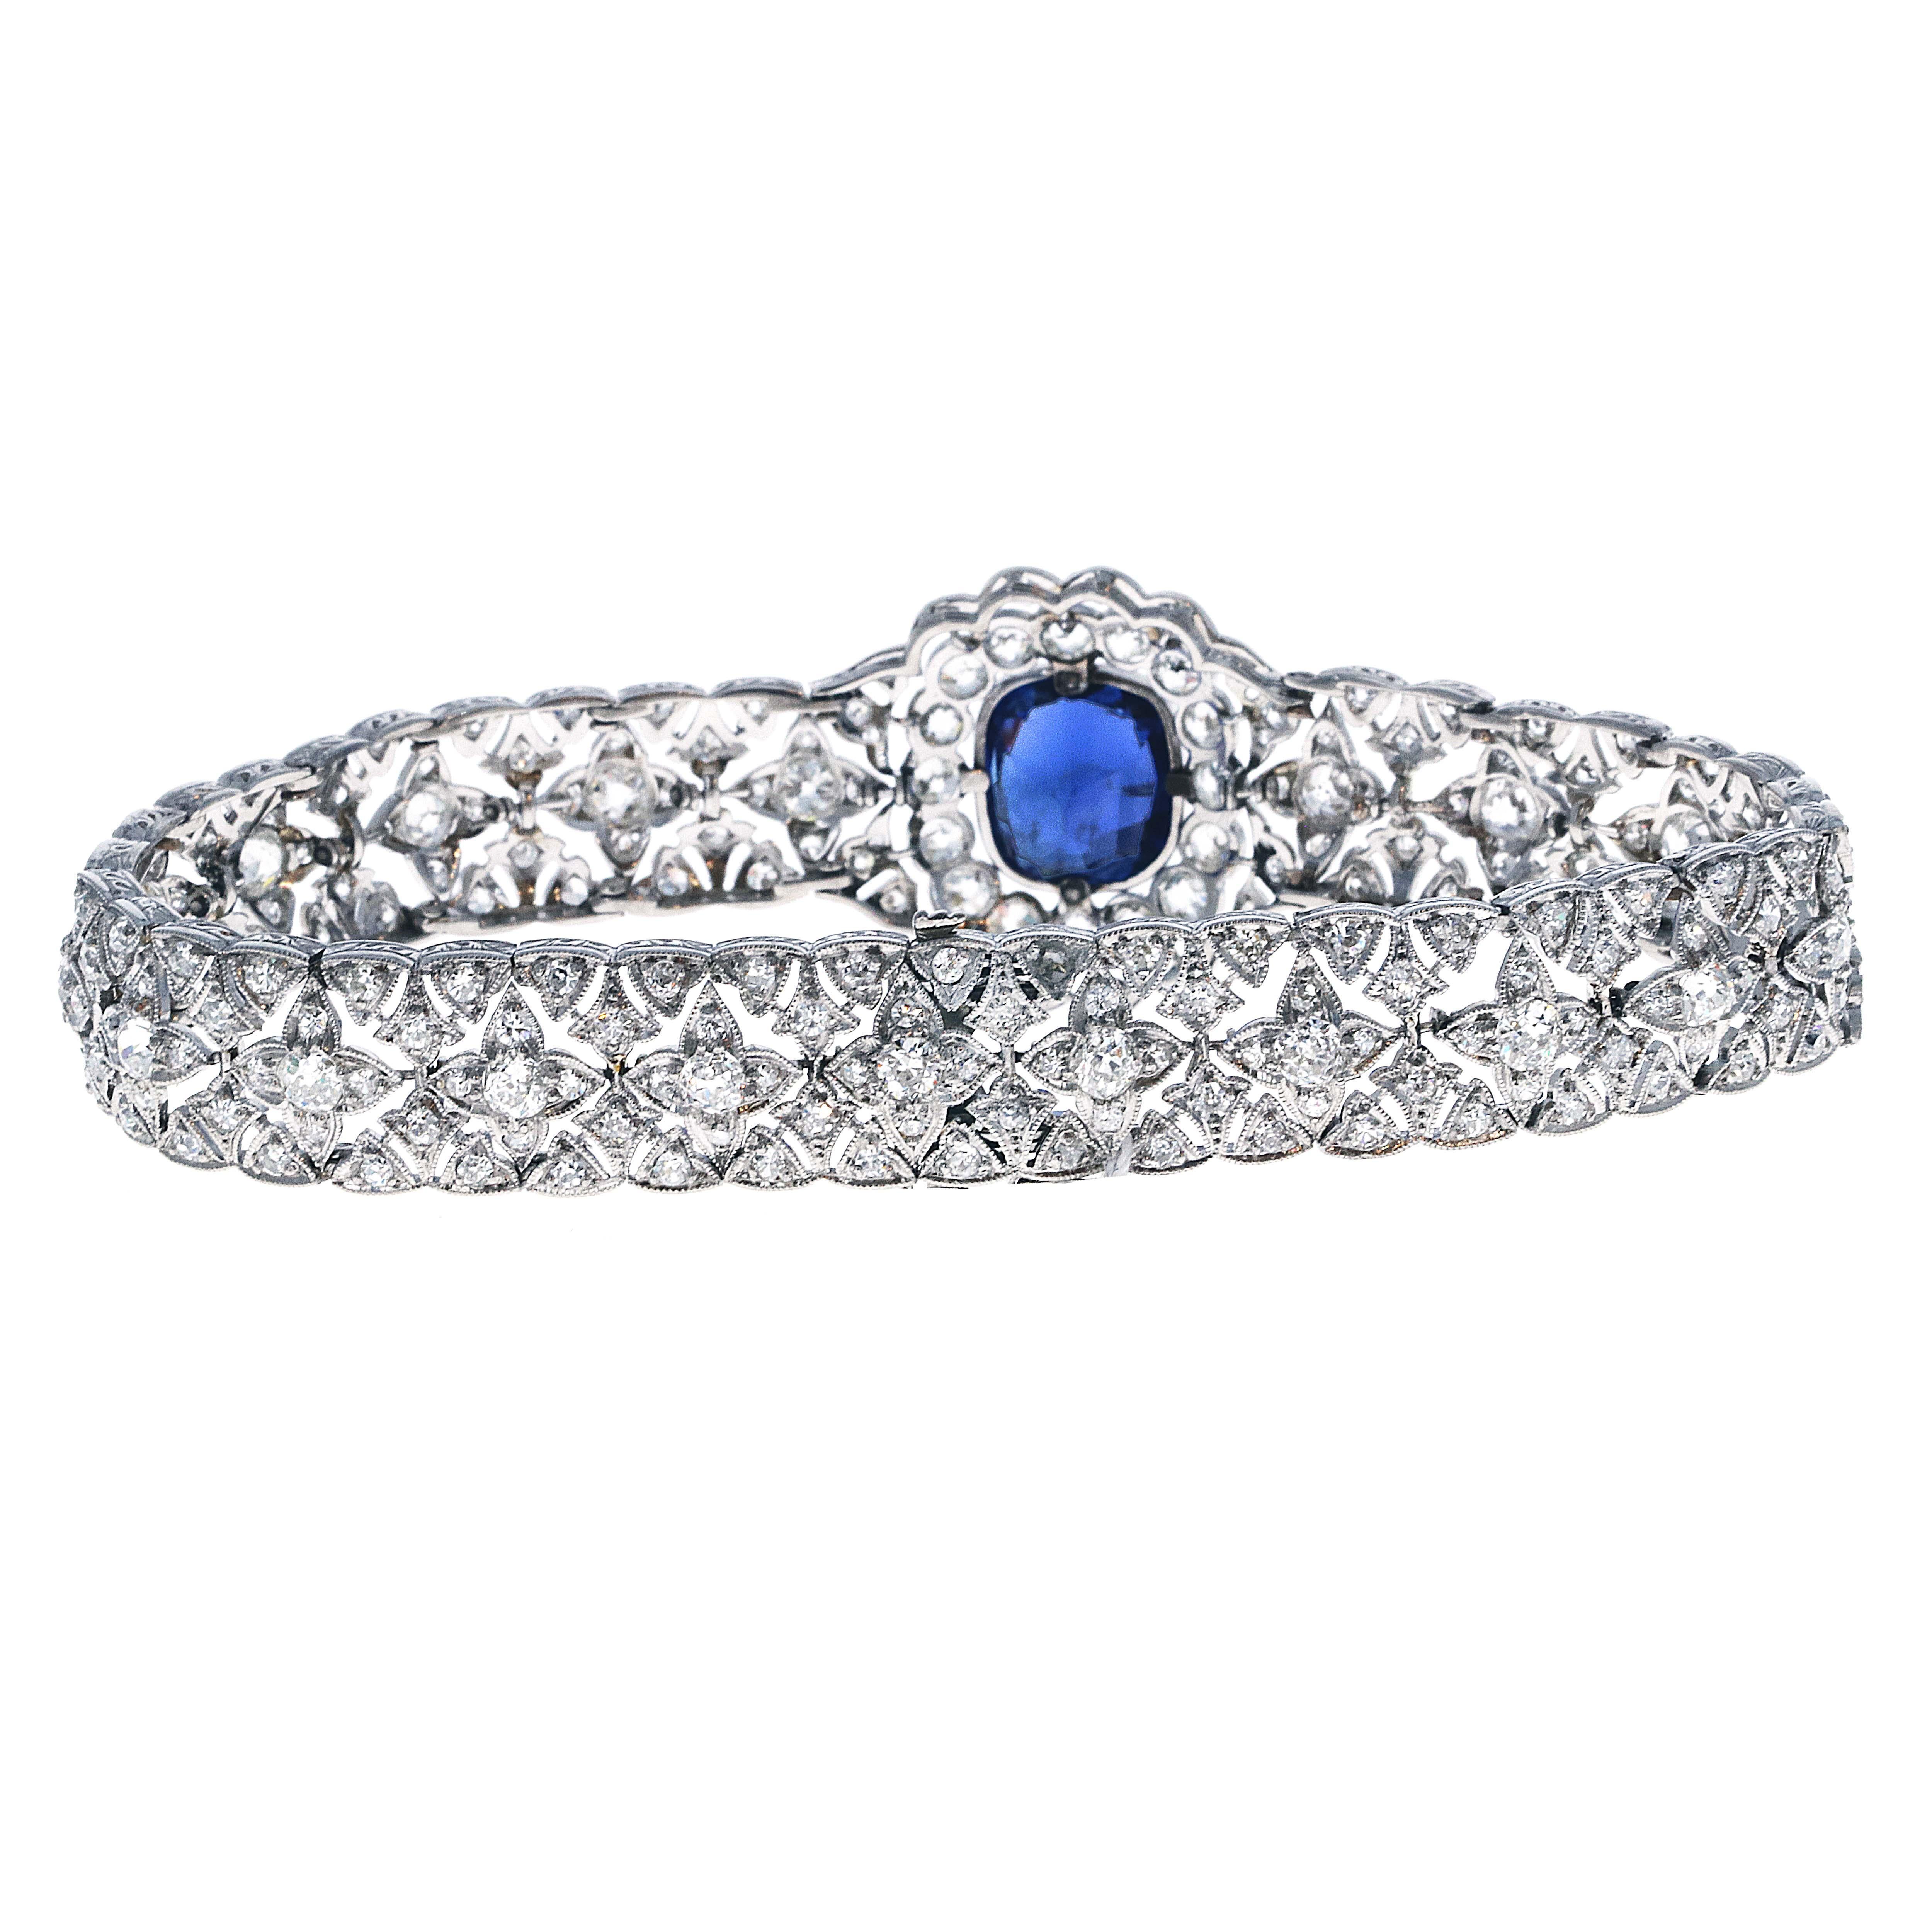 Antique Art Deco 5.85 Carat Blue Sapphire and Diamond Bracelet In Excellent Condition For Sale In Beverly Hills, CA